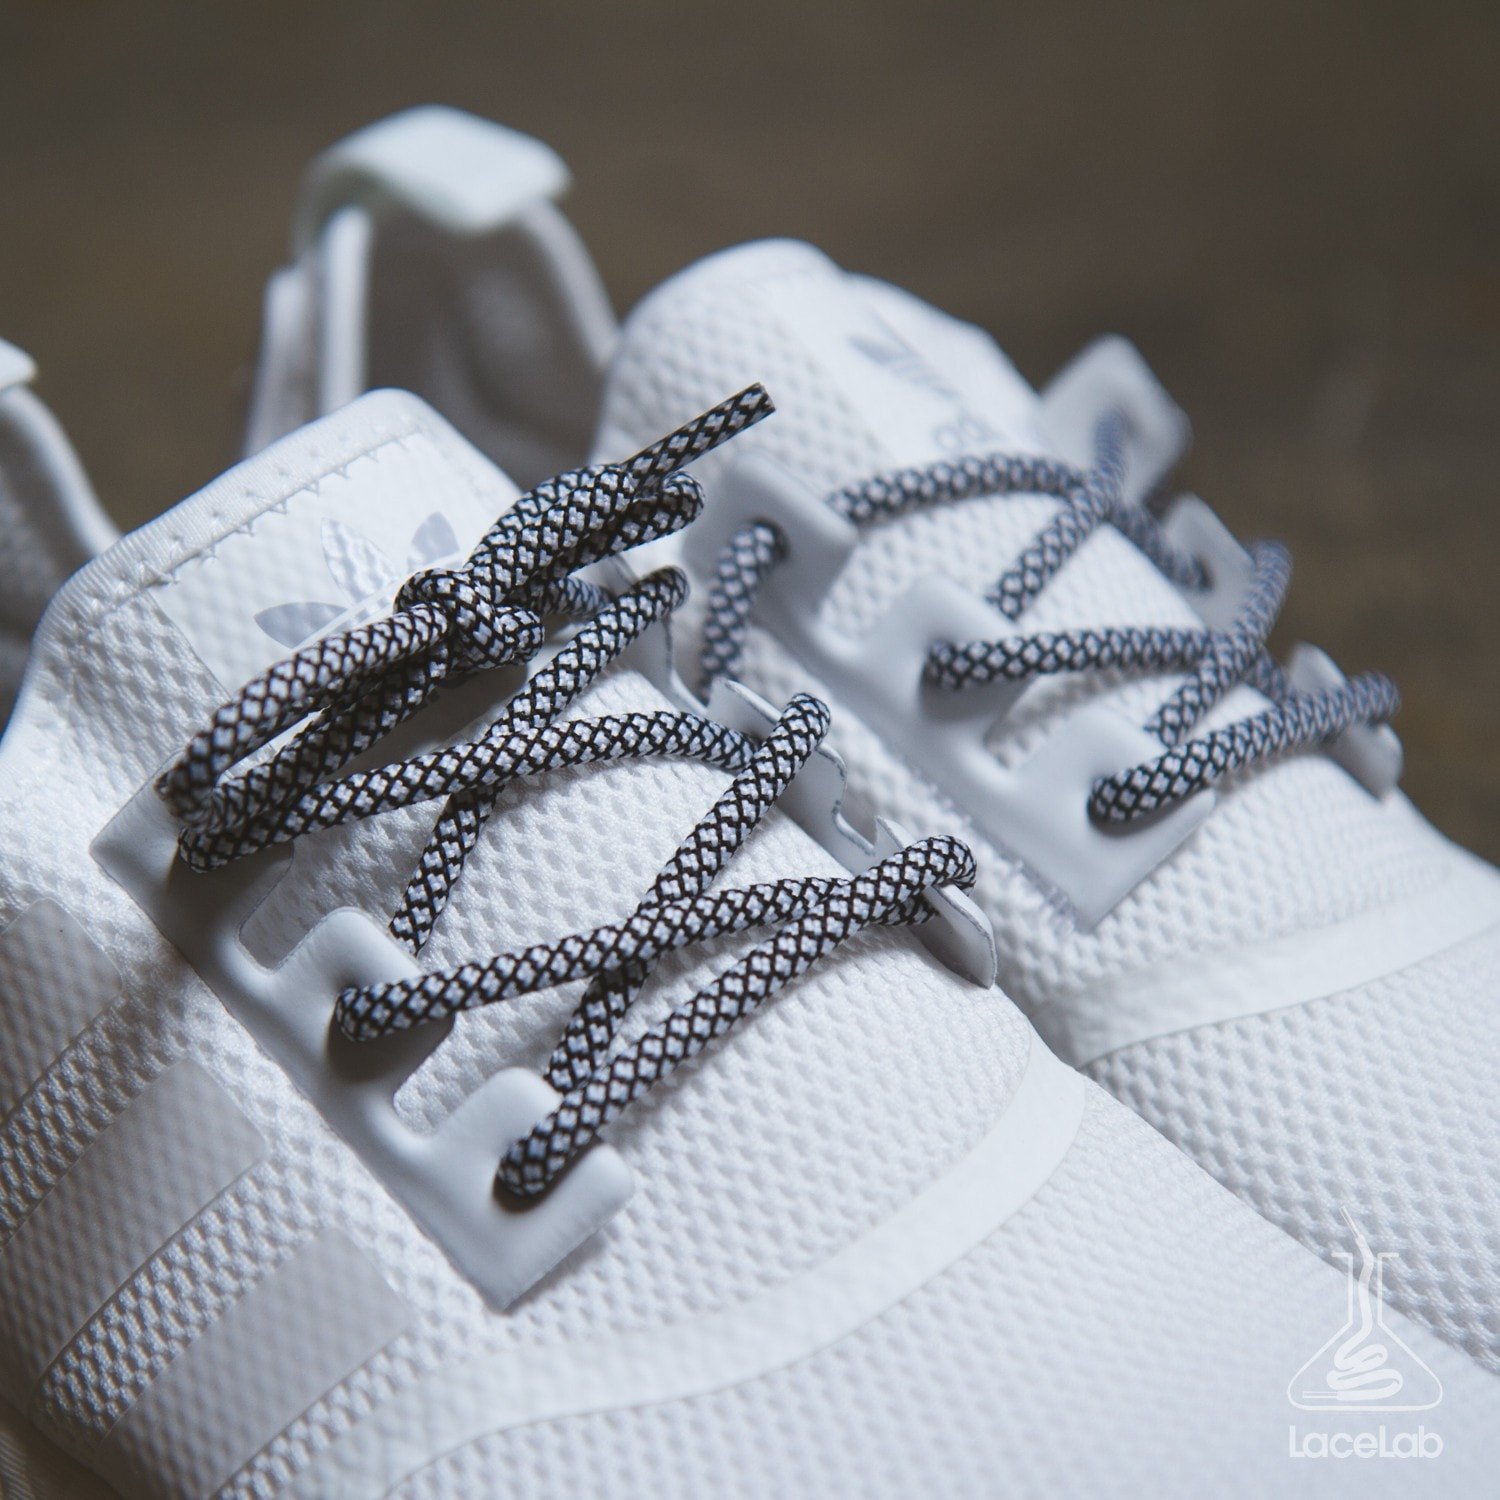 Black/White Rope Laces – Sneaks And Laces